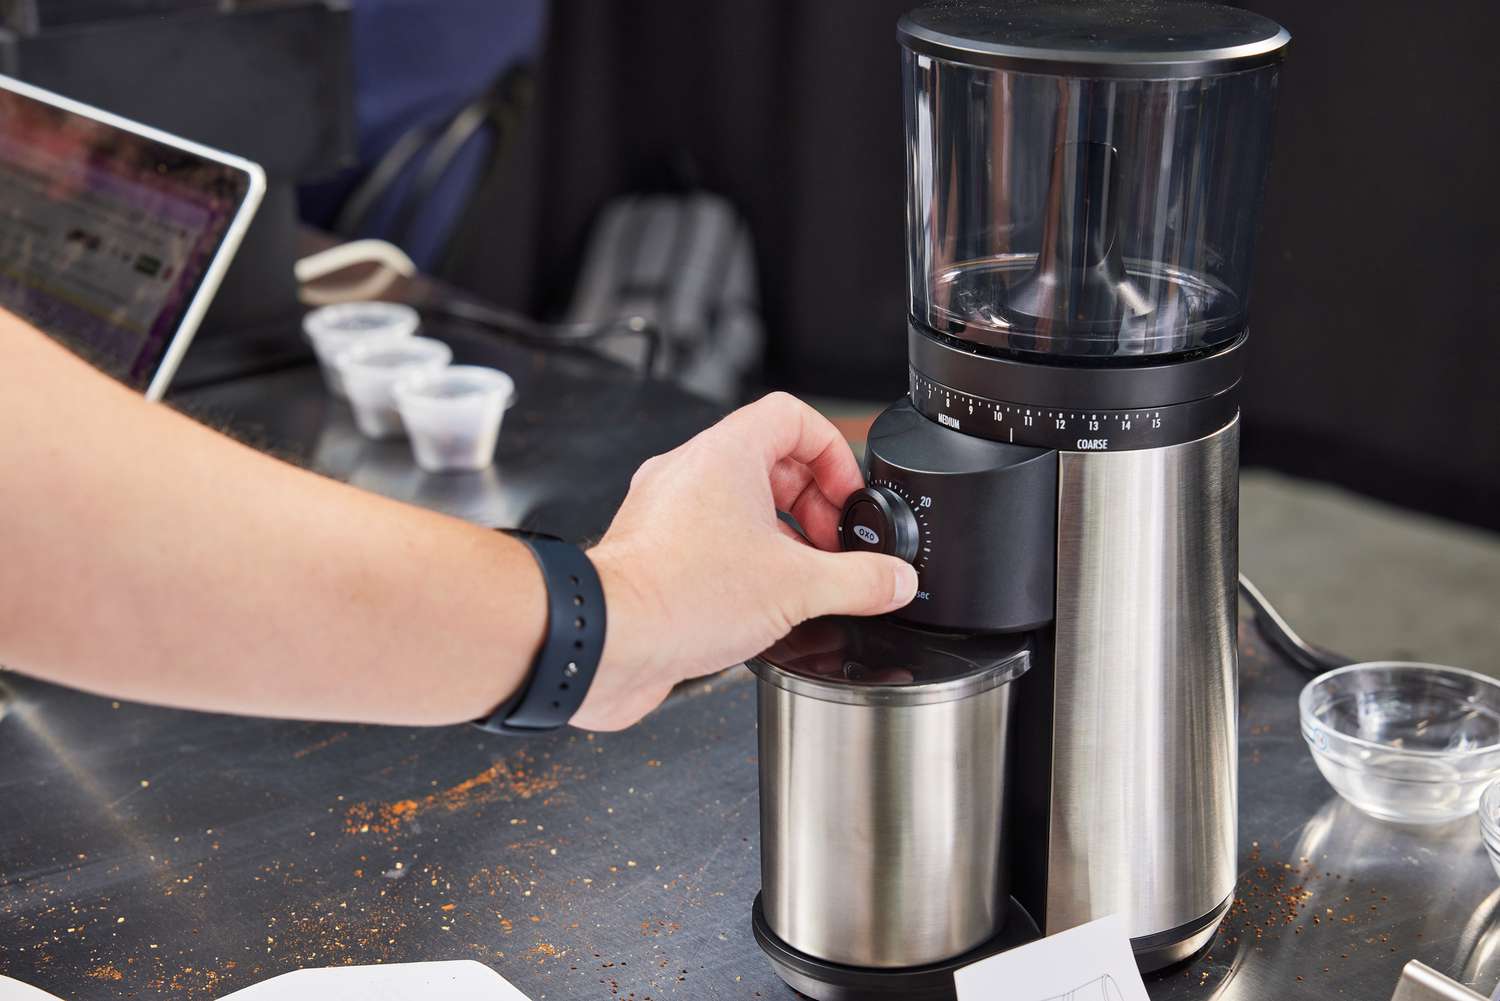 A hand turning the time dial of the OXO burr grinder